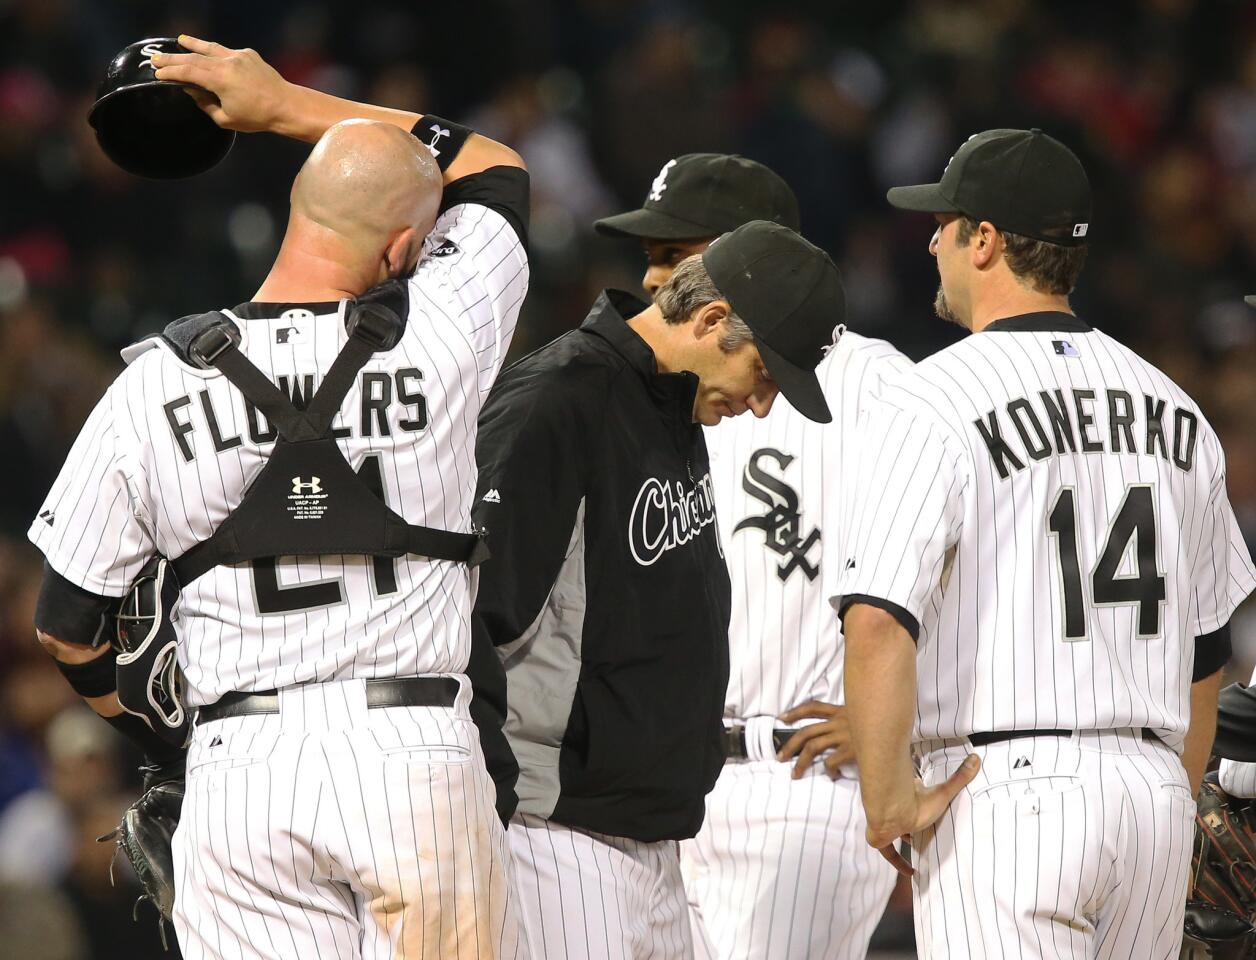 Robin Ventura looks down at the mound after taking out reliever Ronald Belisario after he gave up a one-run double in the ninth inning.